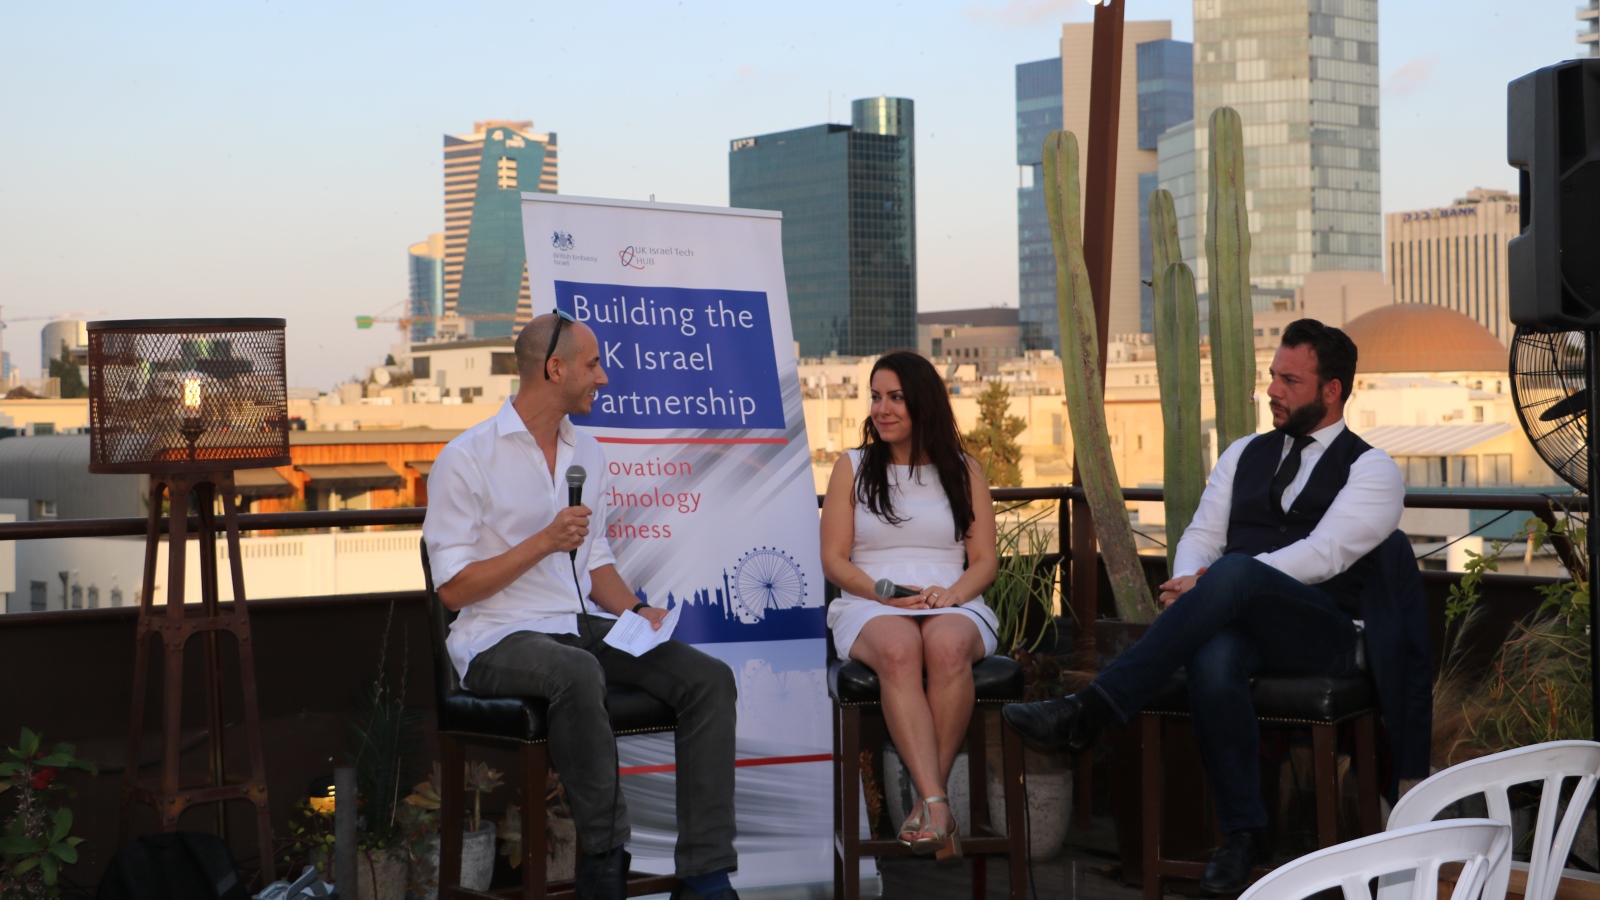 UK Israel Tech Hub at a Northern Health Science Alliance meetup in Tel Aviv. Photo courtesy of British Embassy